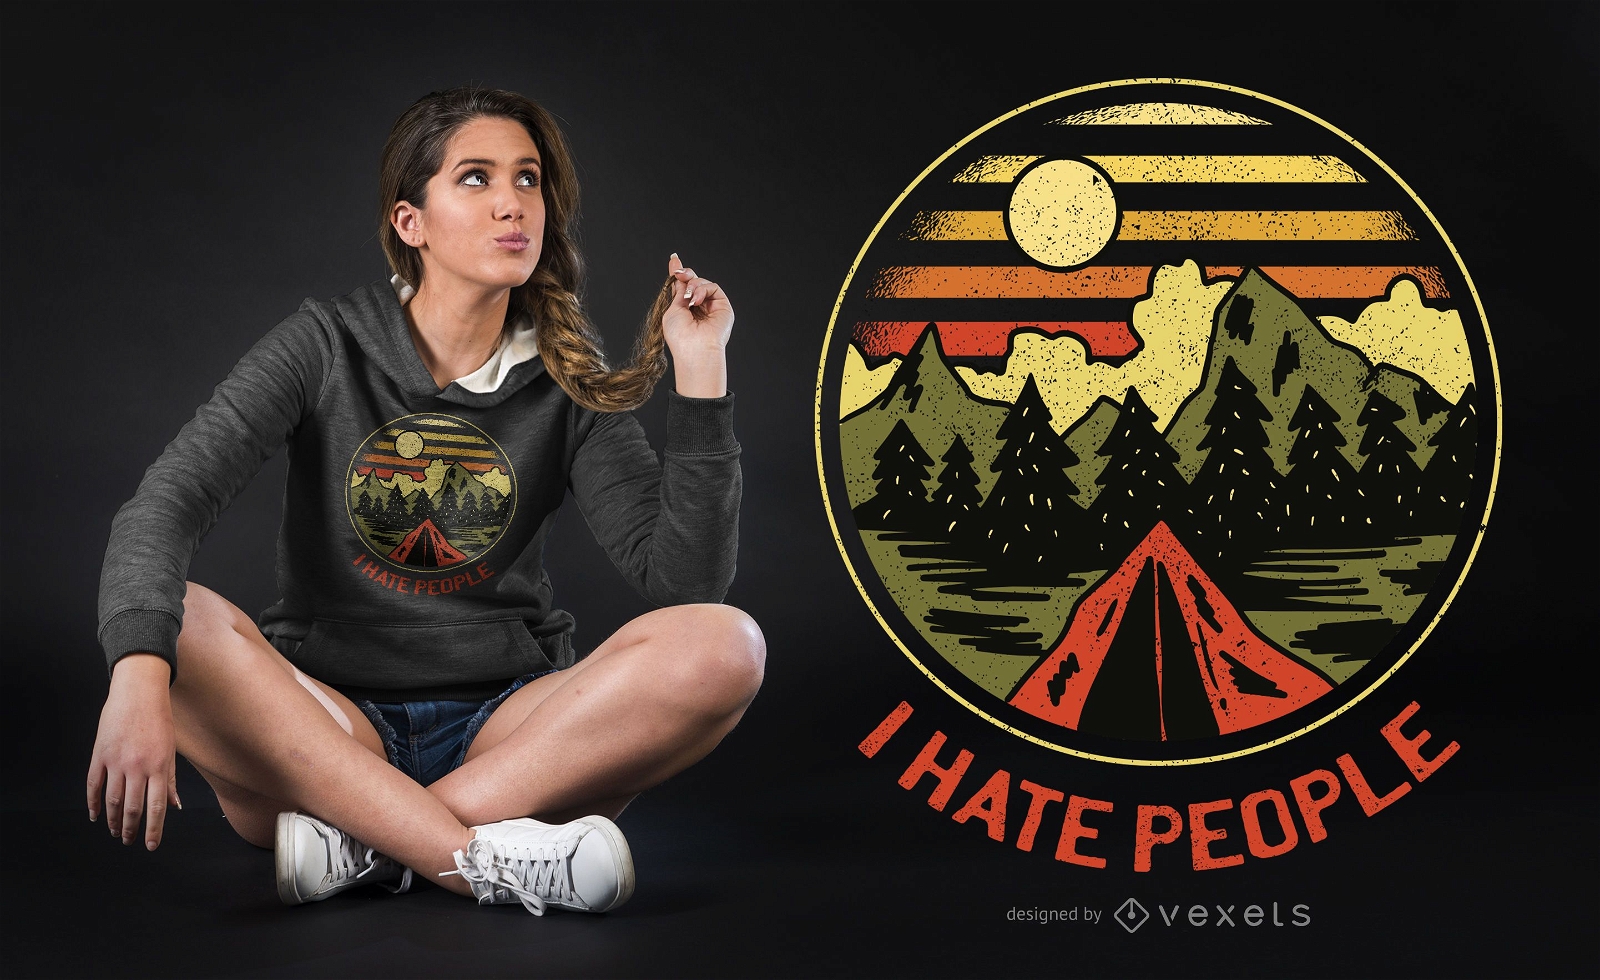 Hate People T-shirt Design